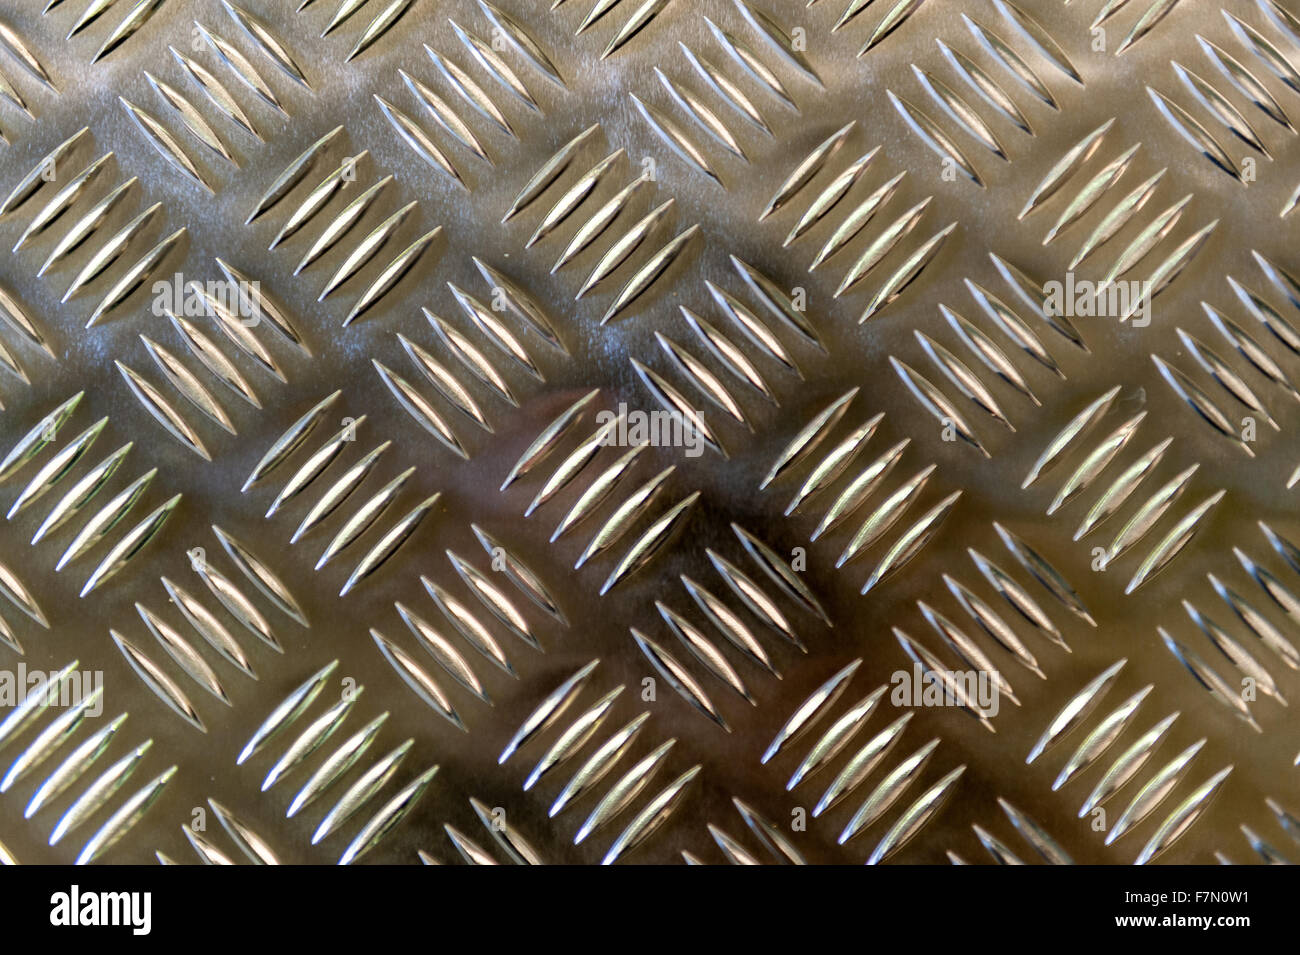 Metallic plate with a grid imposed pattern for gripping Stock Photo